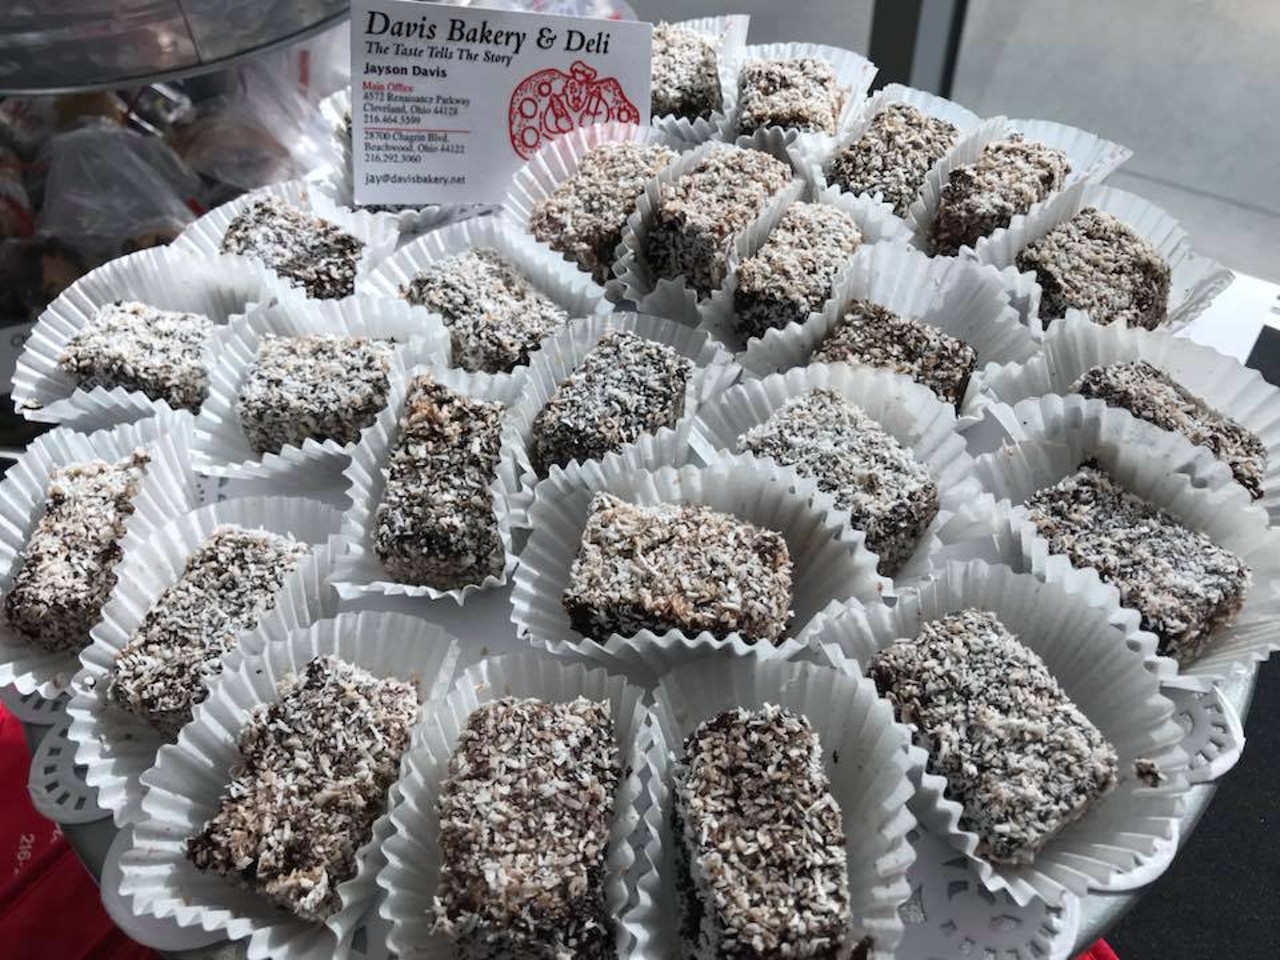 Coconut Bars 
What: The airy, chocolate-dipped cakes dusted in flaky coconut
Why: The sweet treats were perfected by Cleveland Jewish bakeries decades ago
Photo via Davis Bakery/Facebook